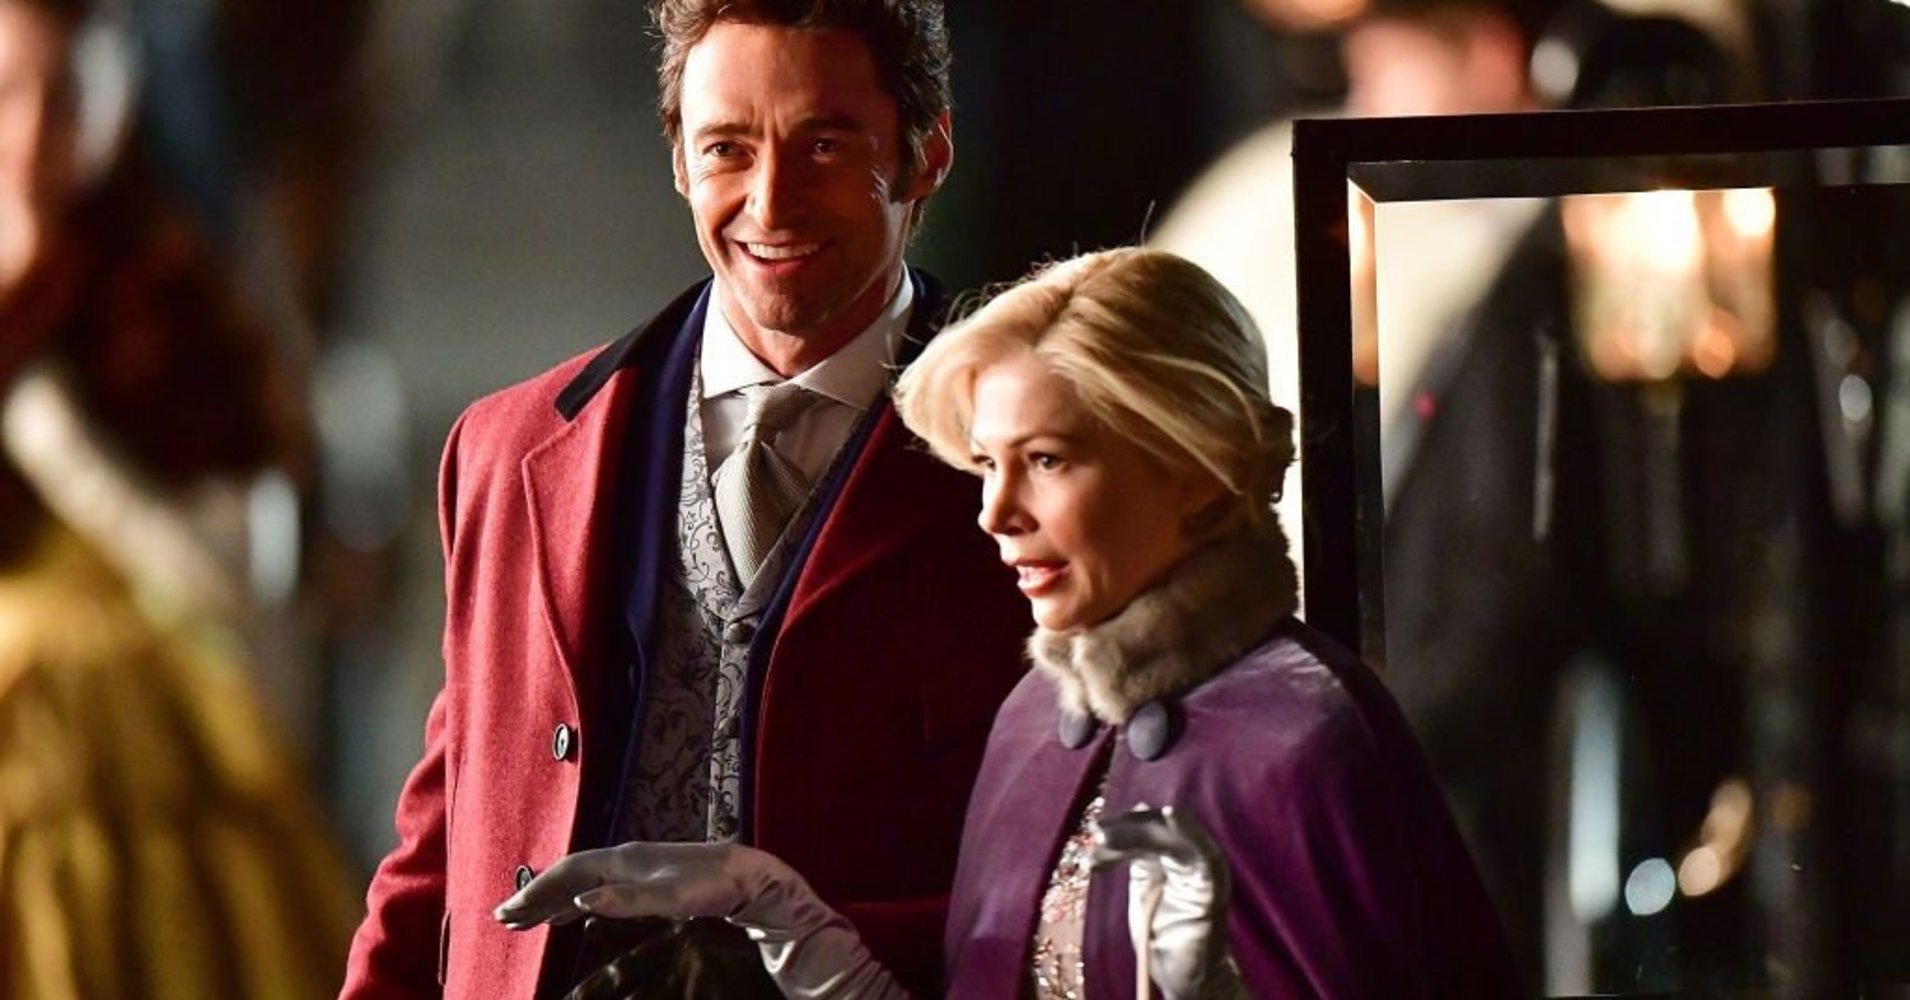 Hugh Jackman and Michelle Williams in a scene from The Greatest Showman